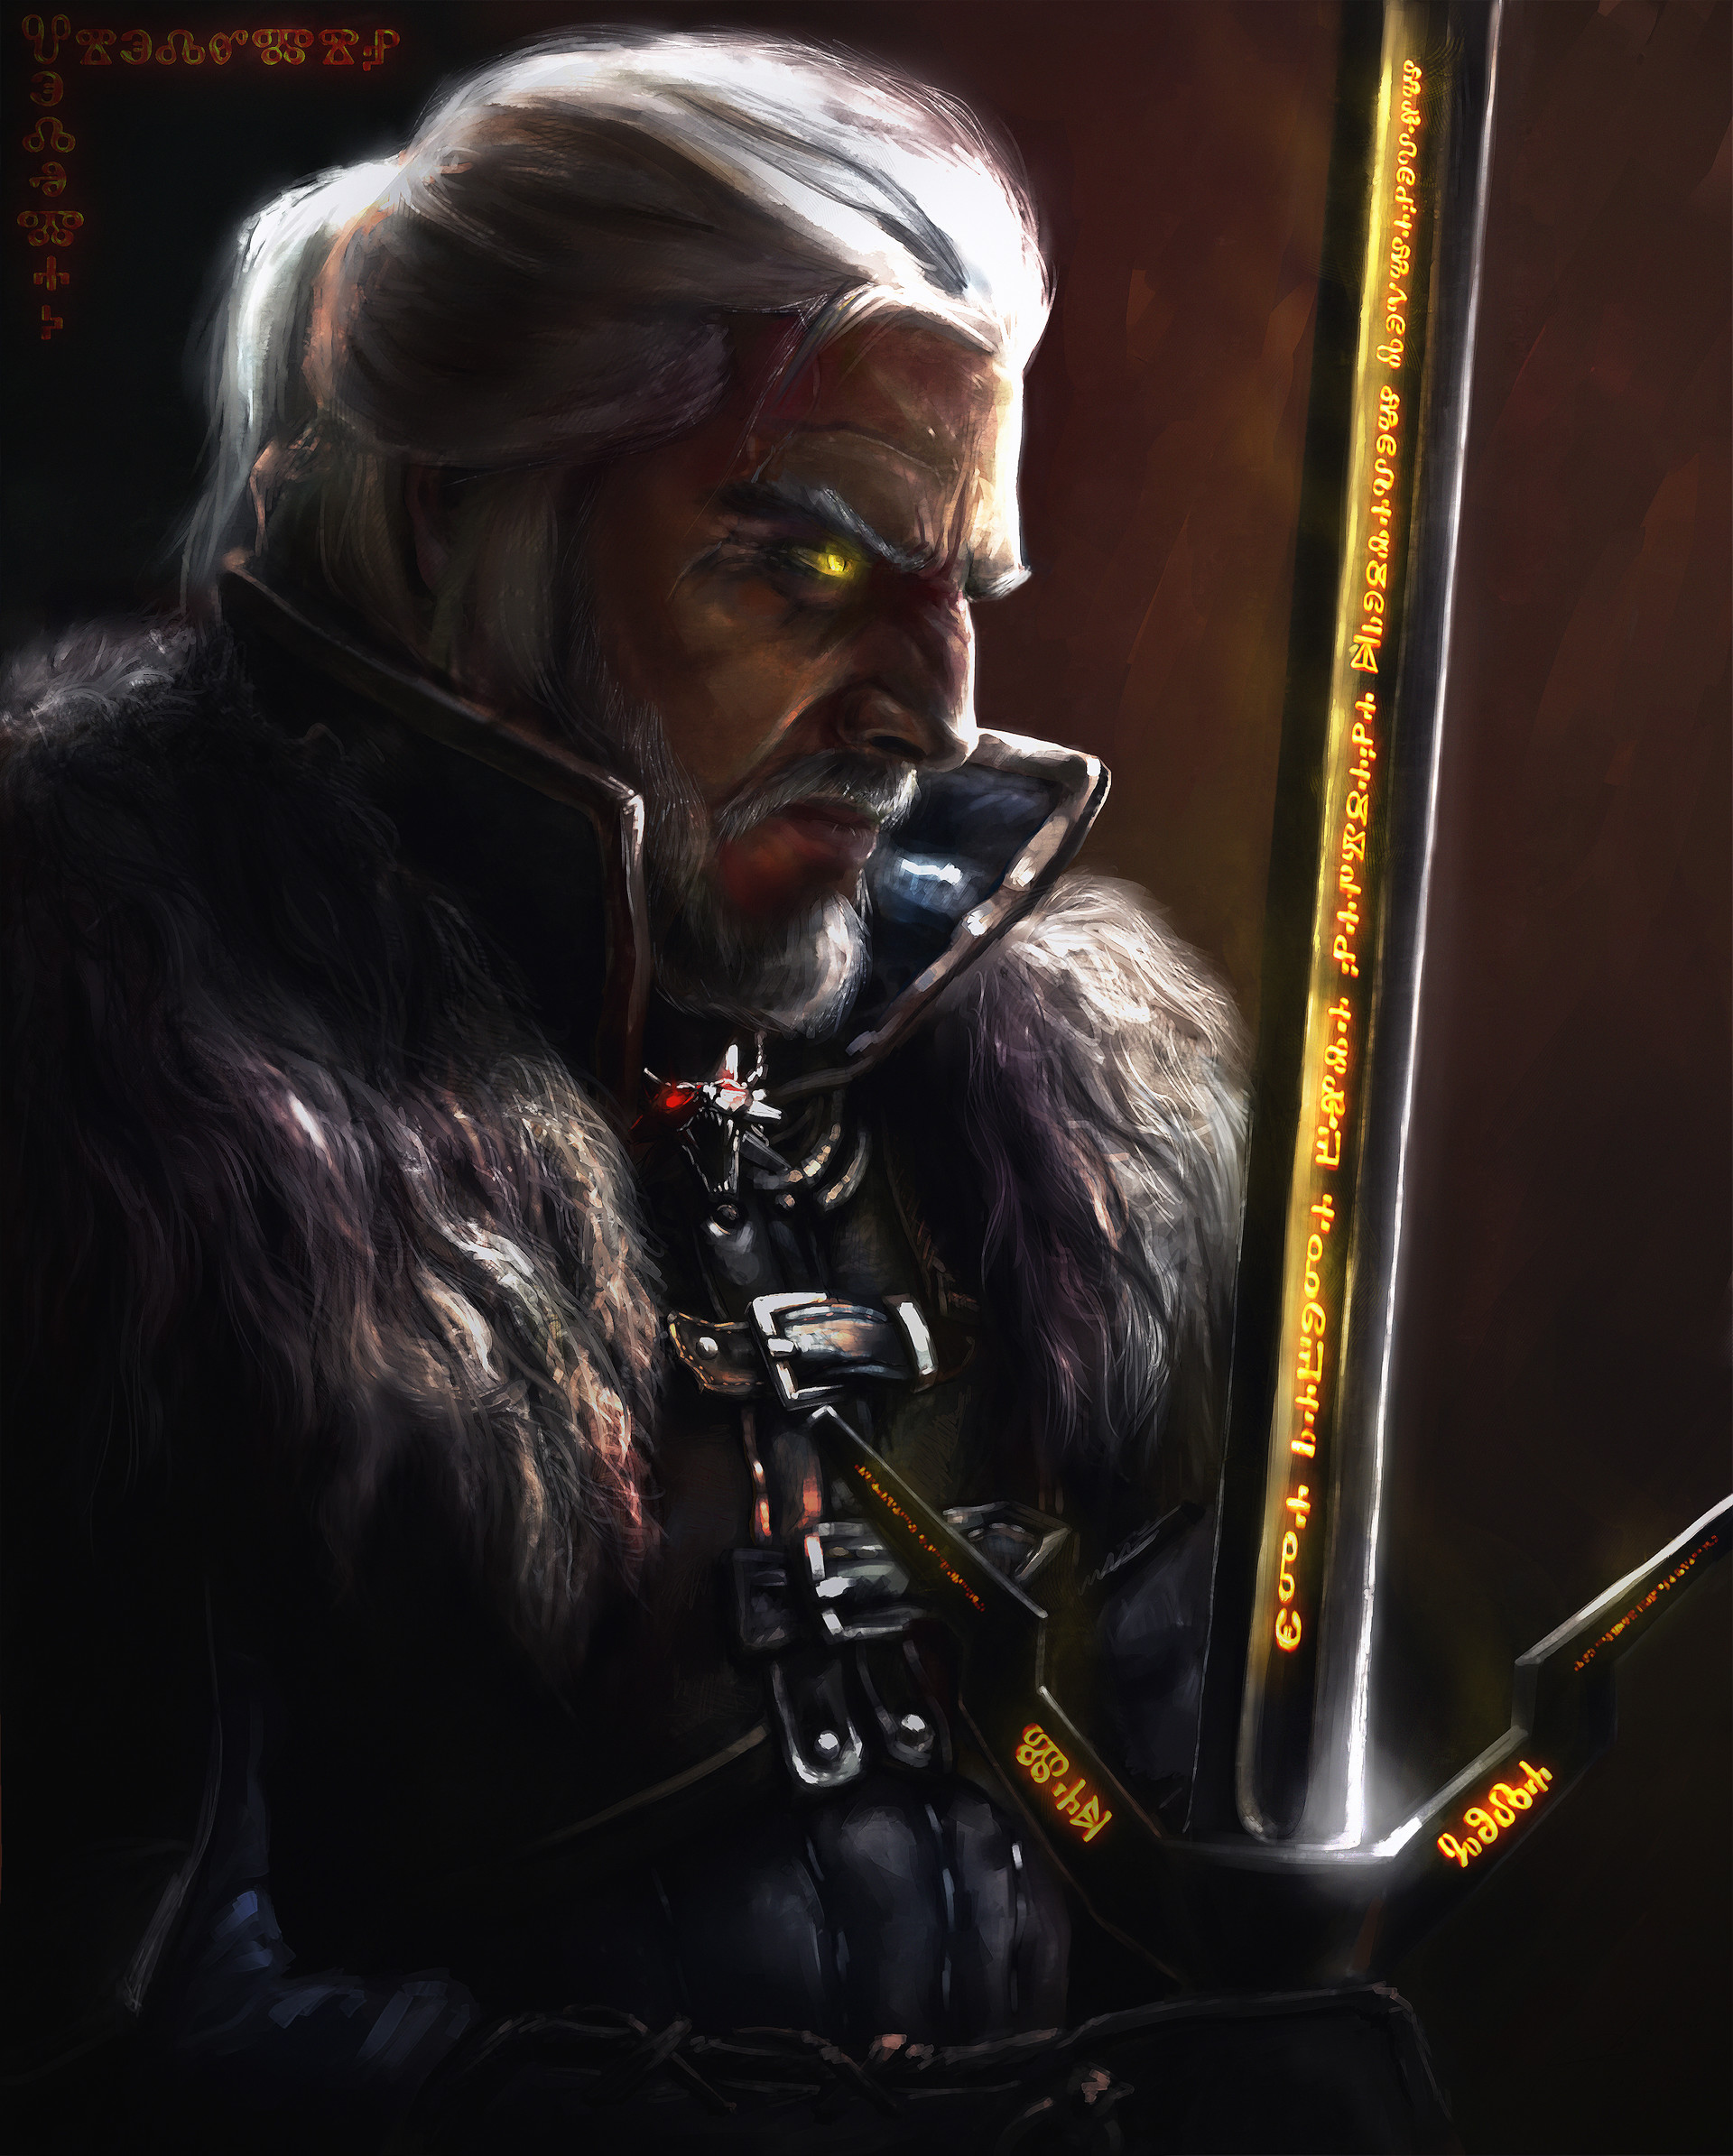 General 1920x2389 video game art fan art digital art Geralt of Rivia The Witcher artwork white hair glowing eyes fantasy art ArtStation video game characters beard leather jacket leather armor fur jacket The Witcher 3: Wild Hunt video game men sword yellow eyes closed mouth